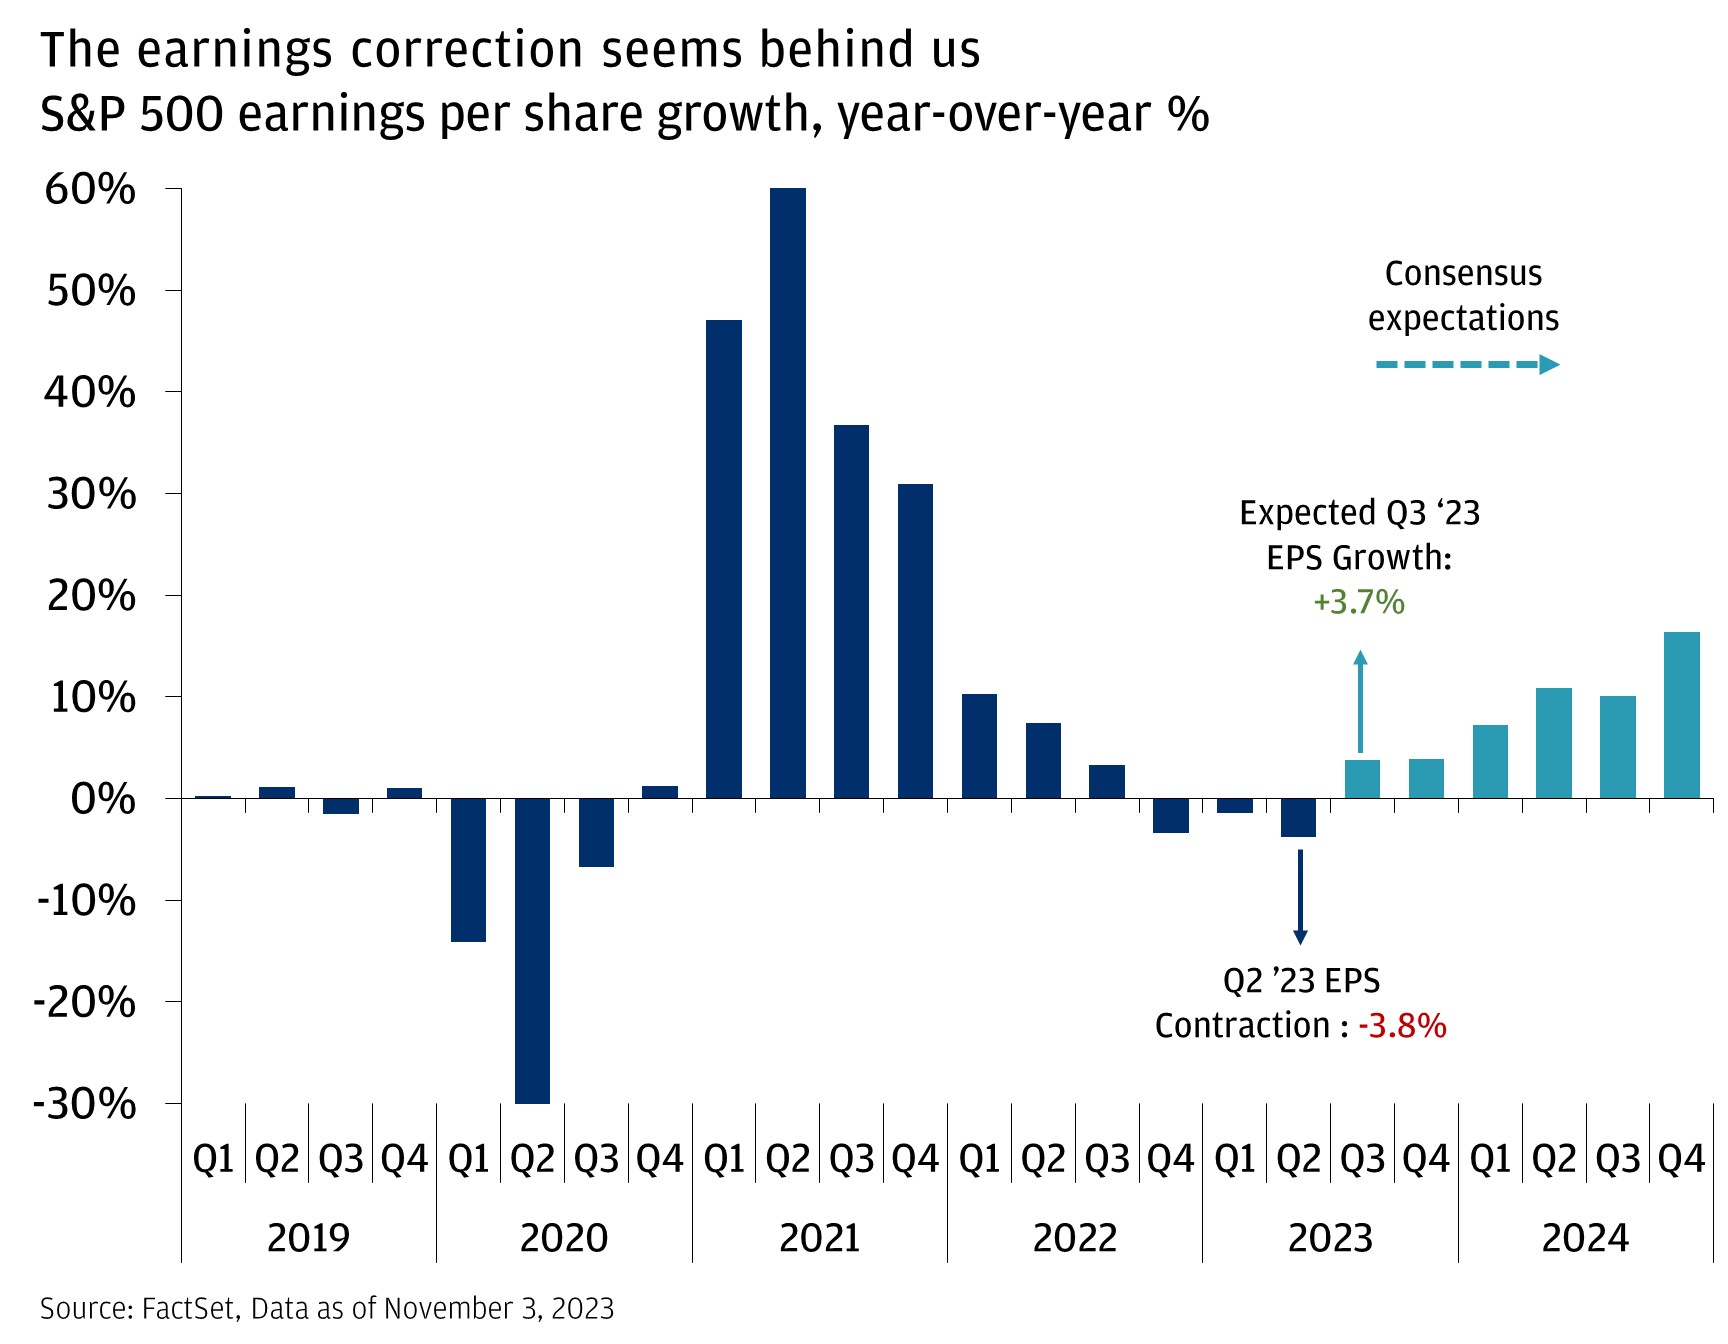 The earnings correction seems behind us